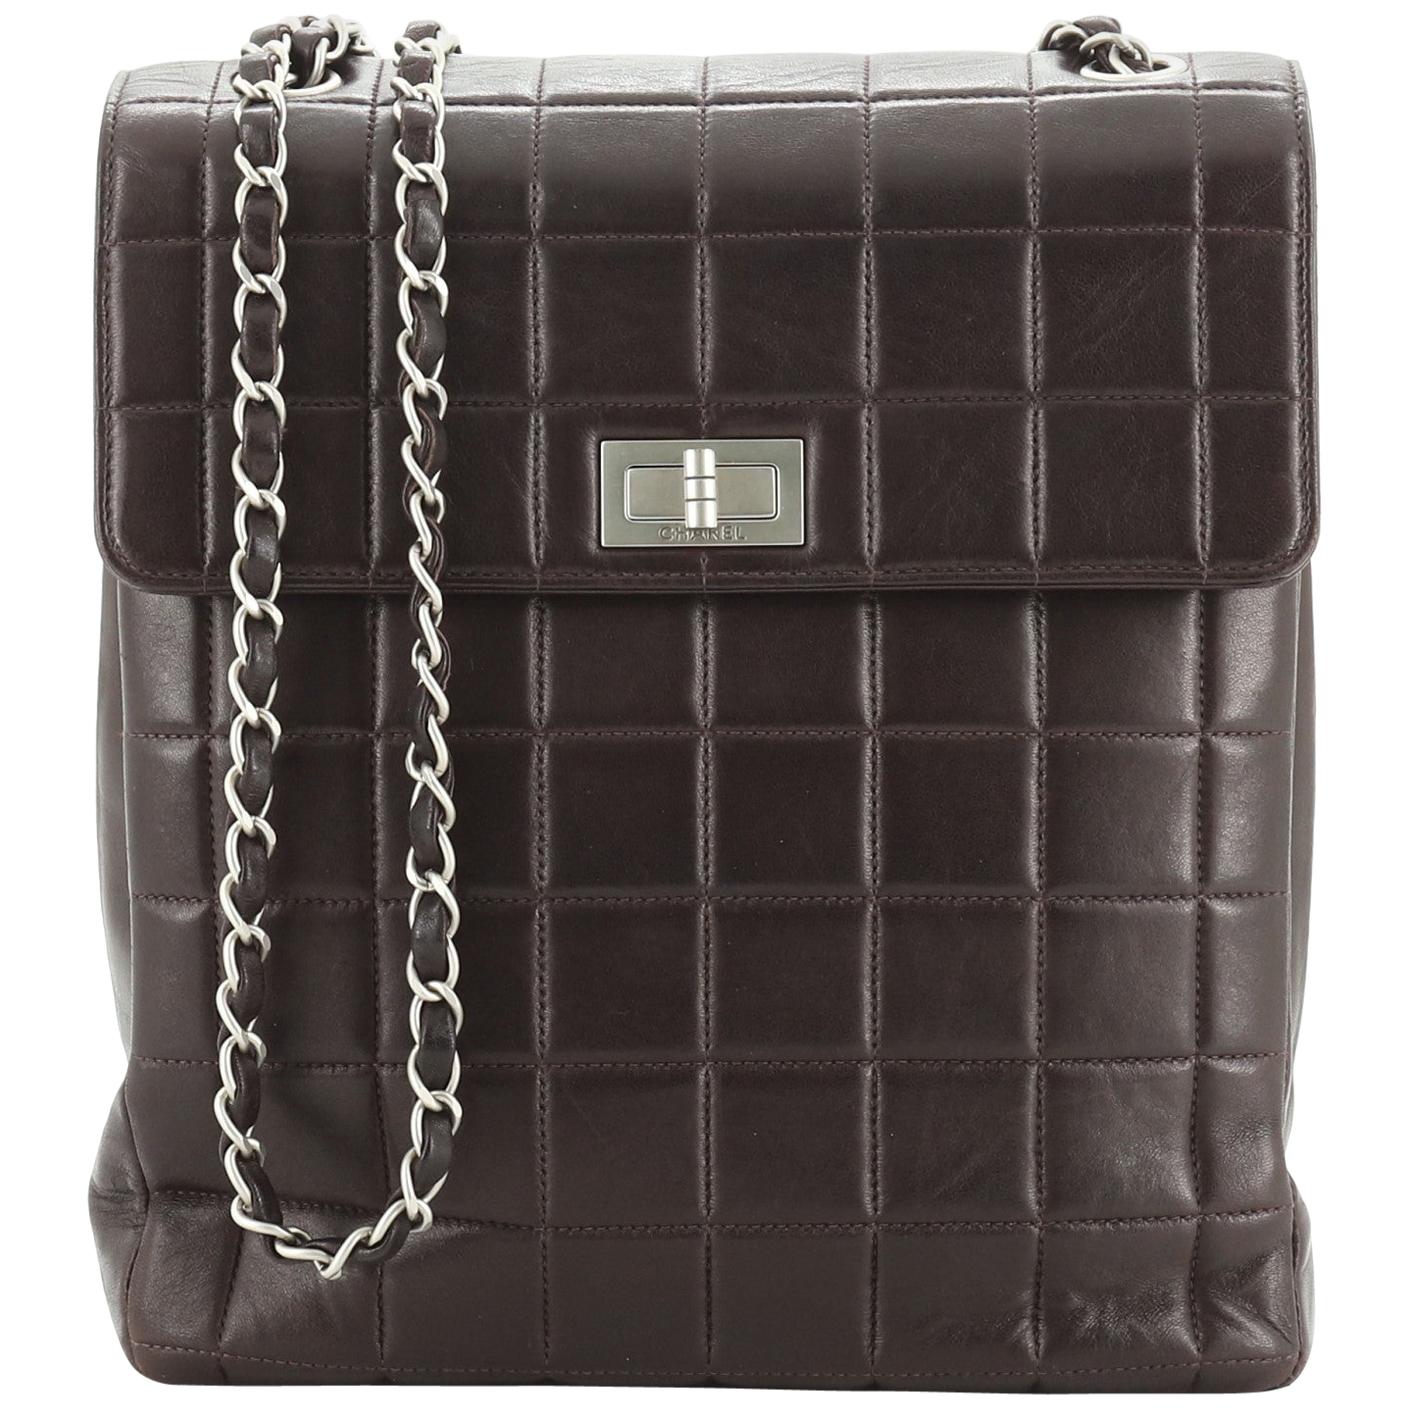 Buy Chanel Multichain Chocolate Bar Flap Bag Quilted Leather 3406201